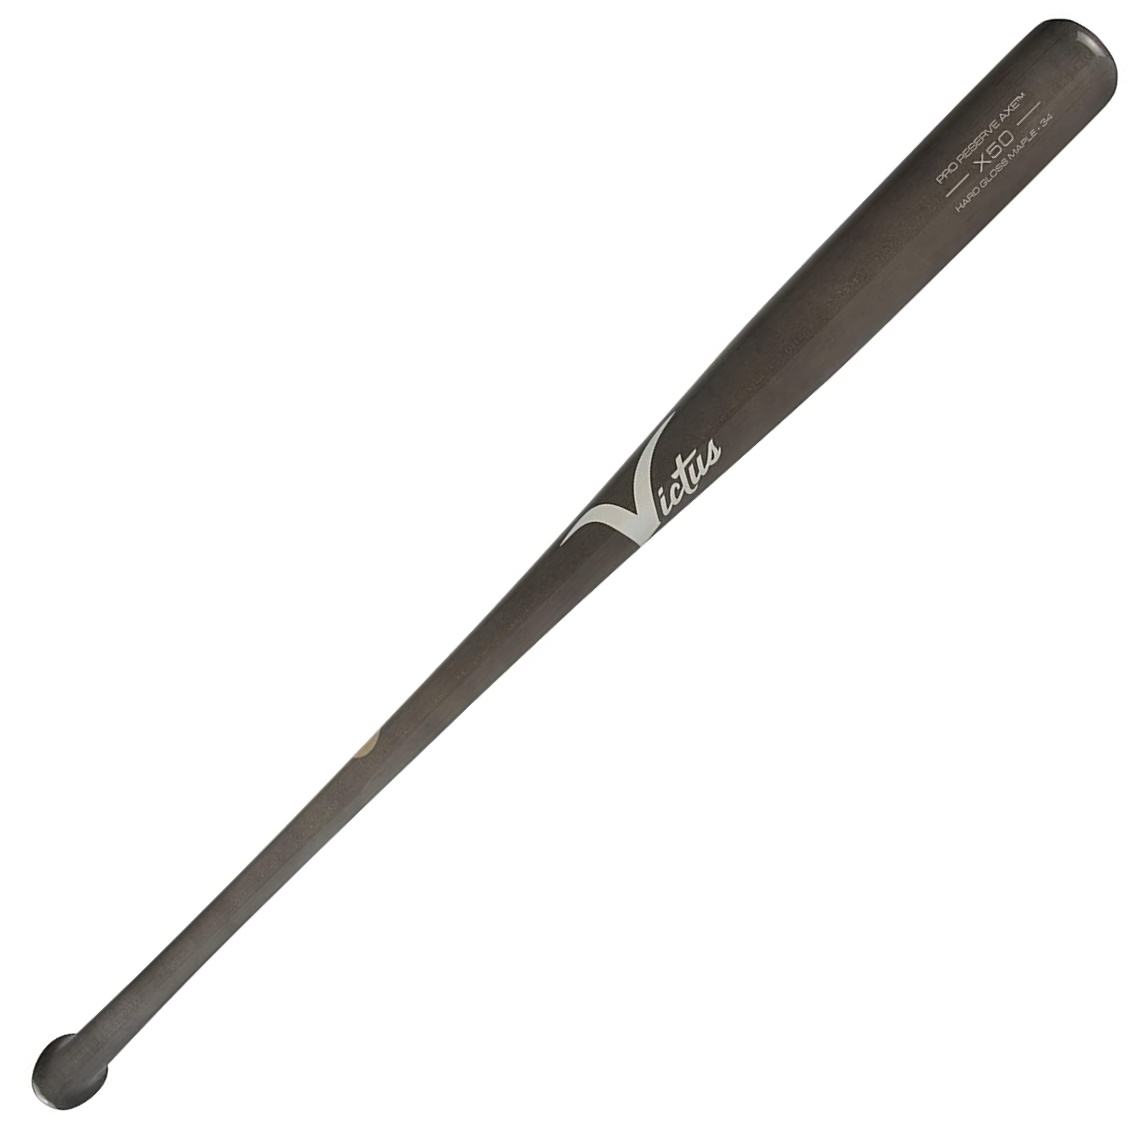 victus-x50-gray-maple-pro-reserve-axe-wood-baseball-bat-33-inch VAXERWMX50-GY-33 Victus 819128024290 Crafted for power the Victus X50 combines the Axe Bat™ knob and